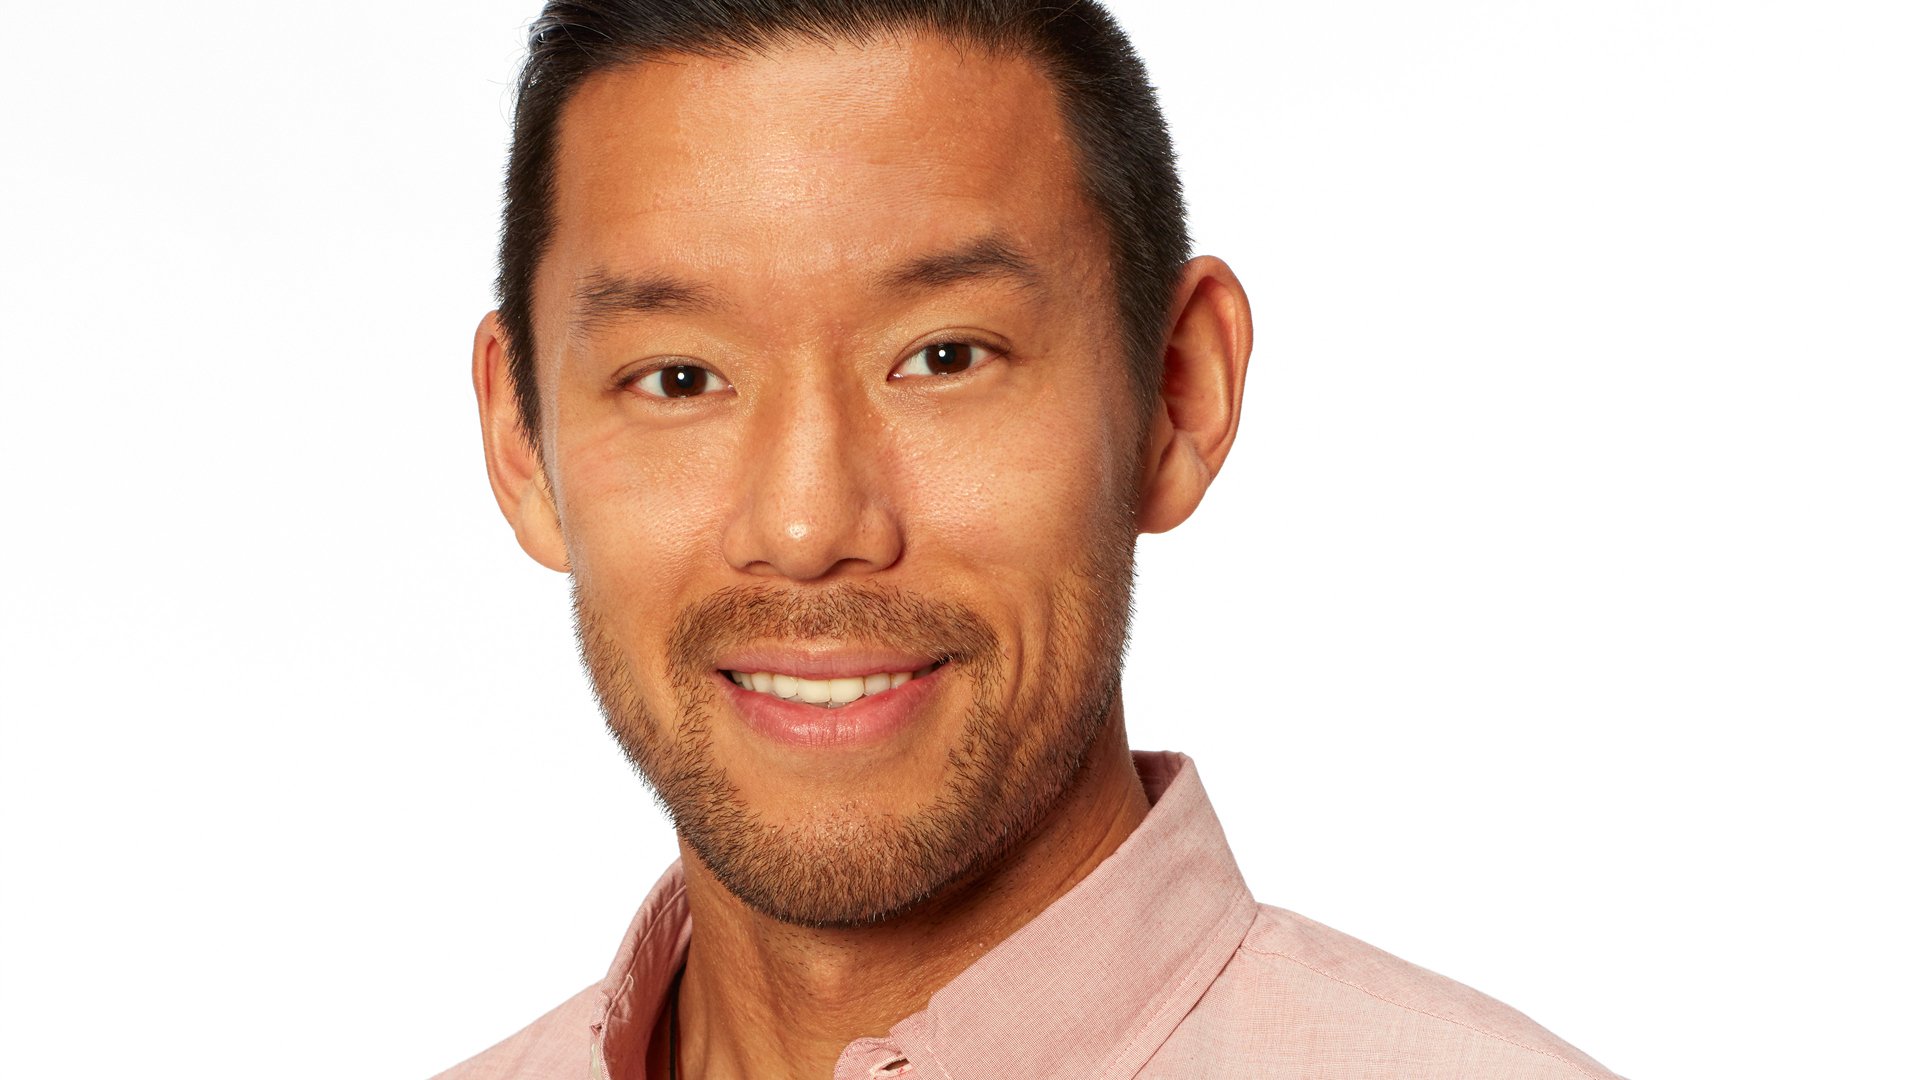 Headshot of Dr. Joe Park from ‘Bachelor in Paradise’ and ‘The Bachelorette’